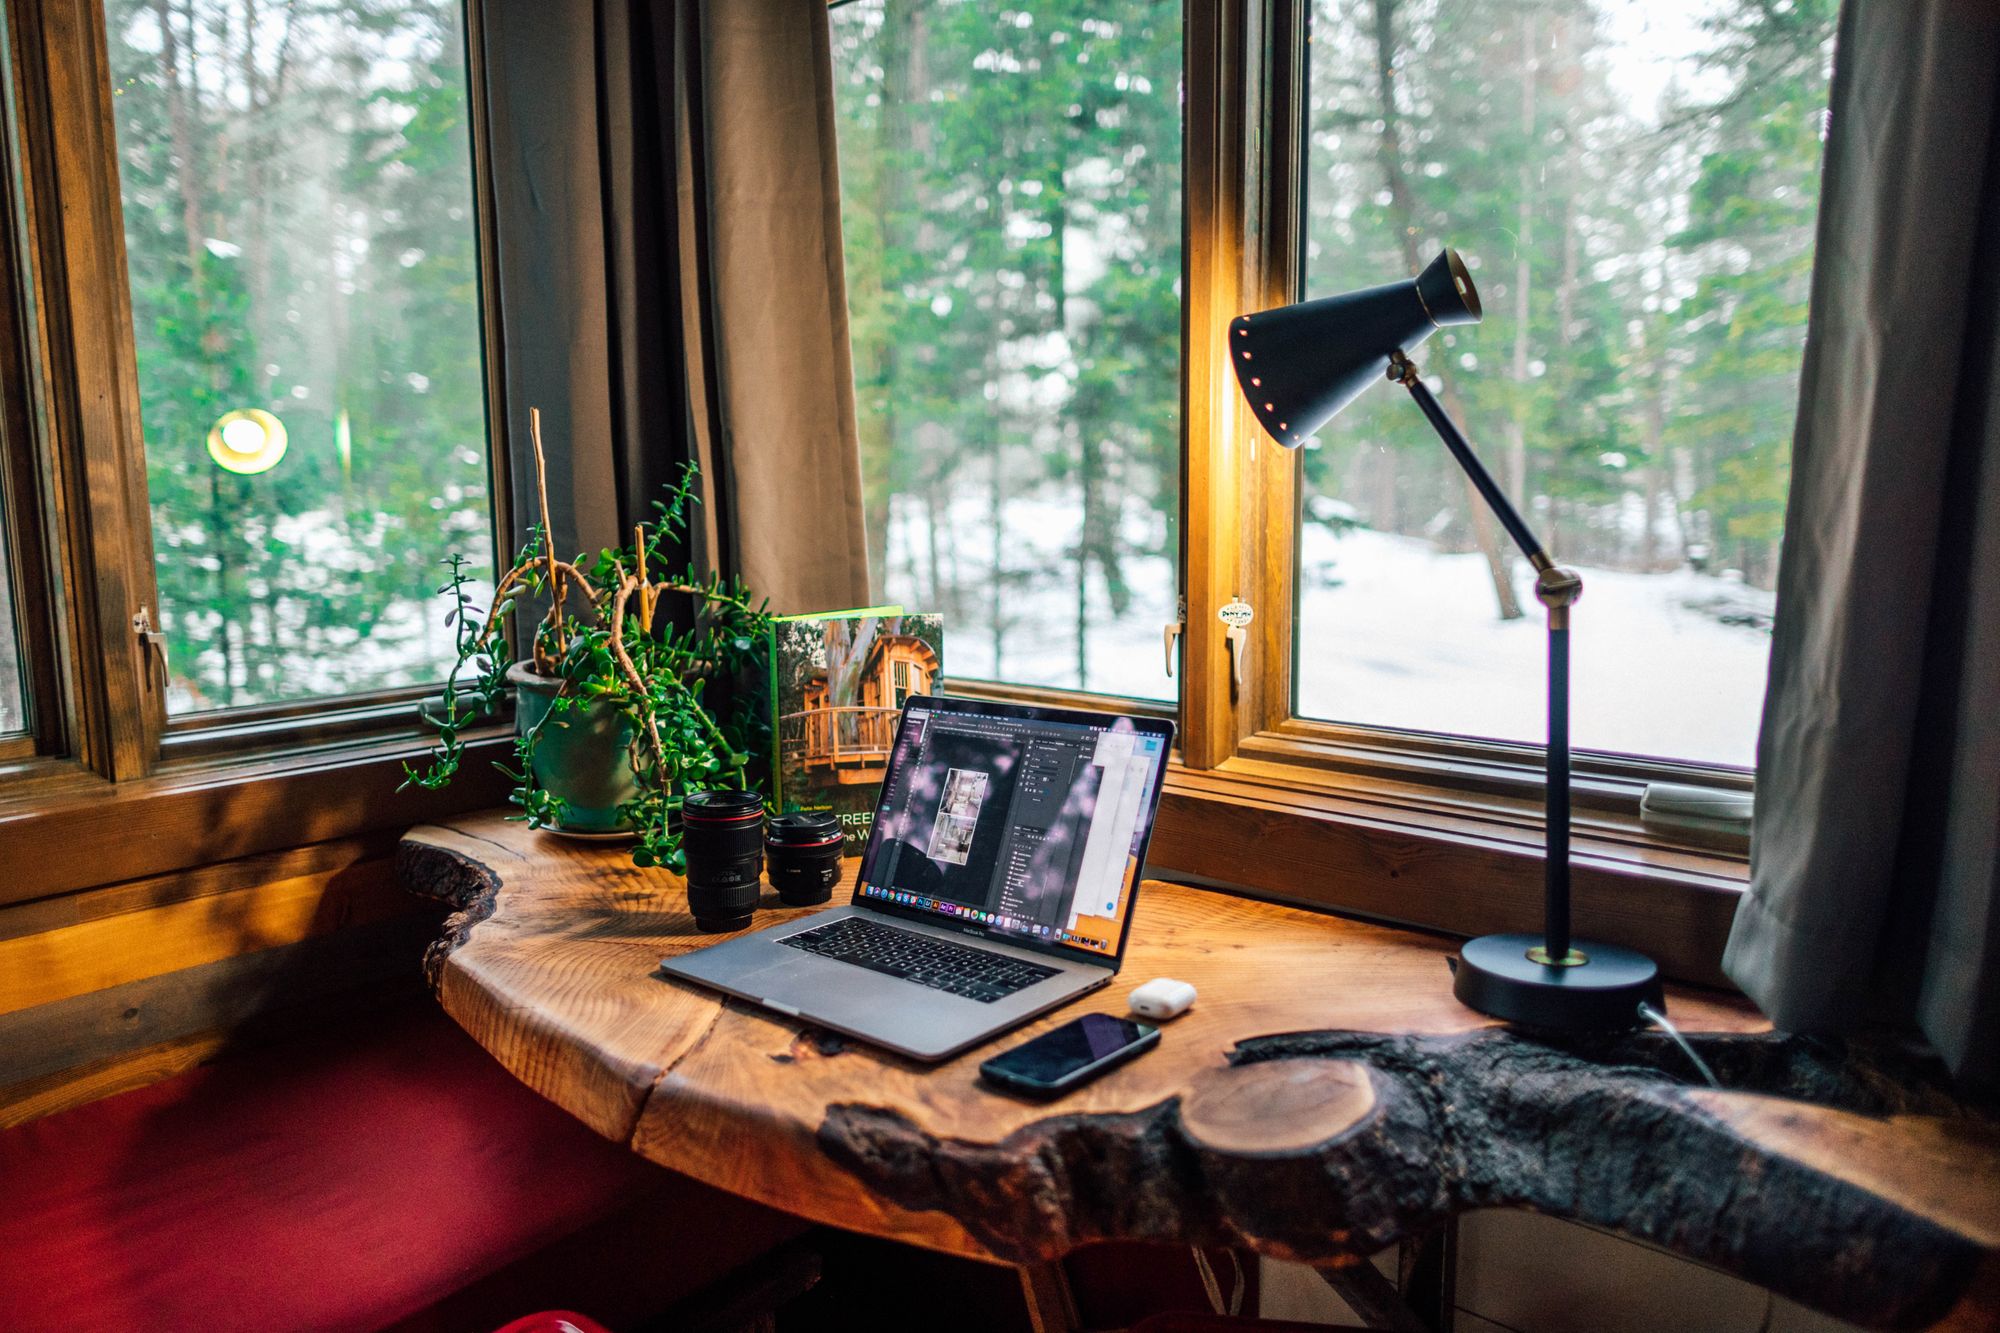 How To: Set Up a Home Office Space to Work From Home